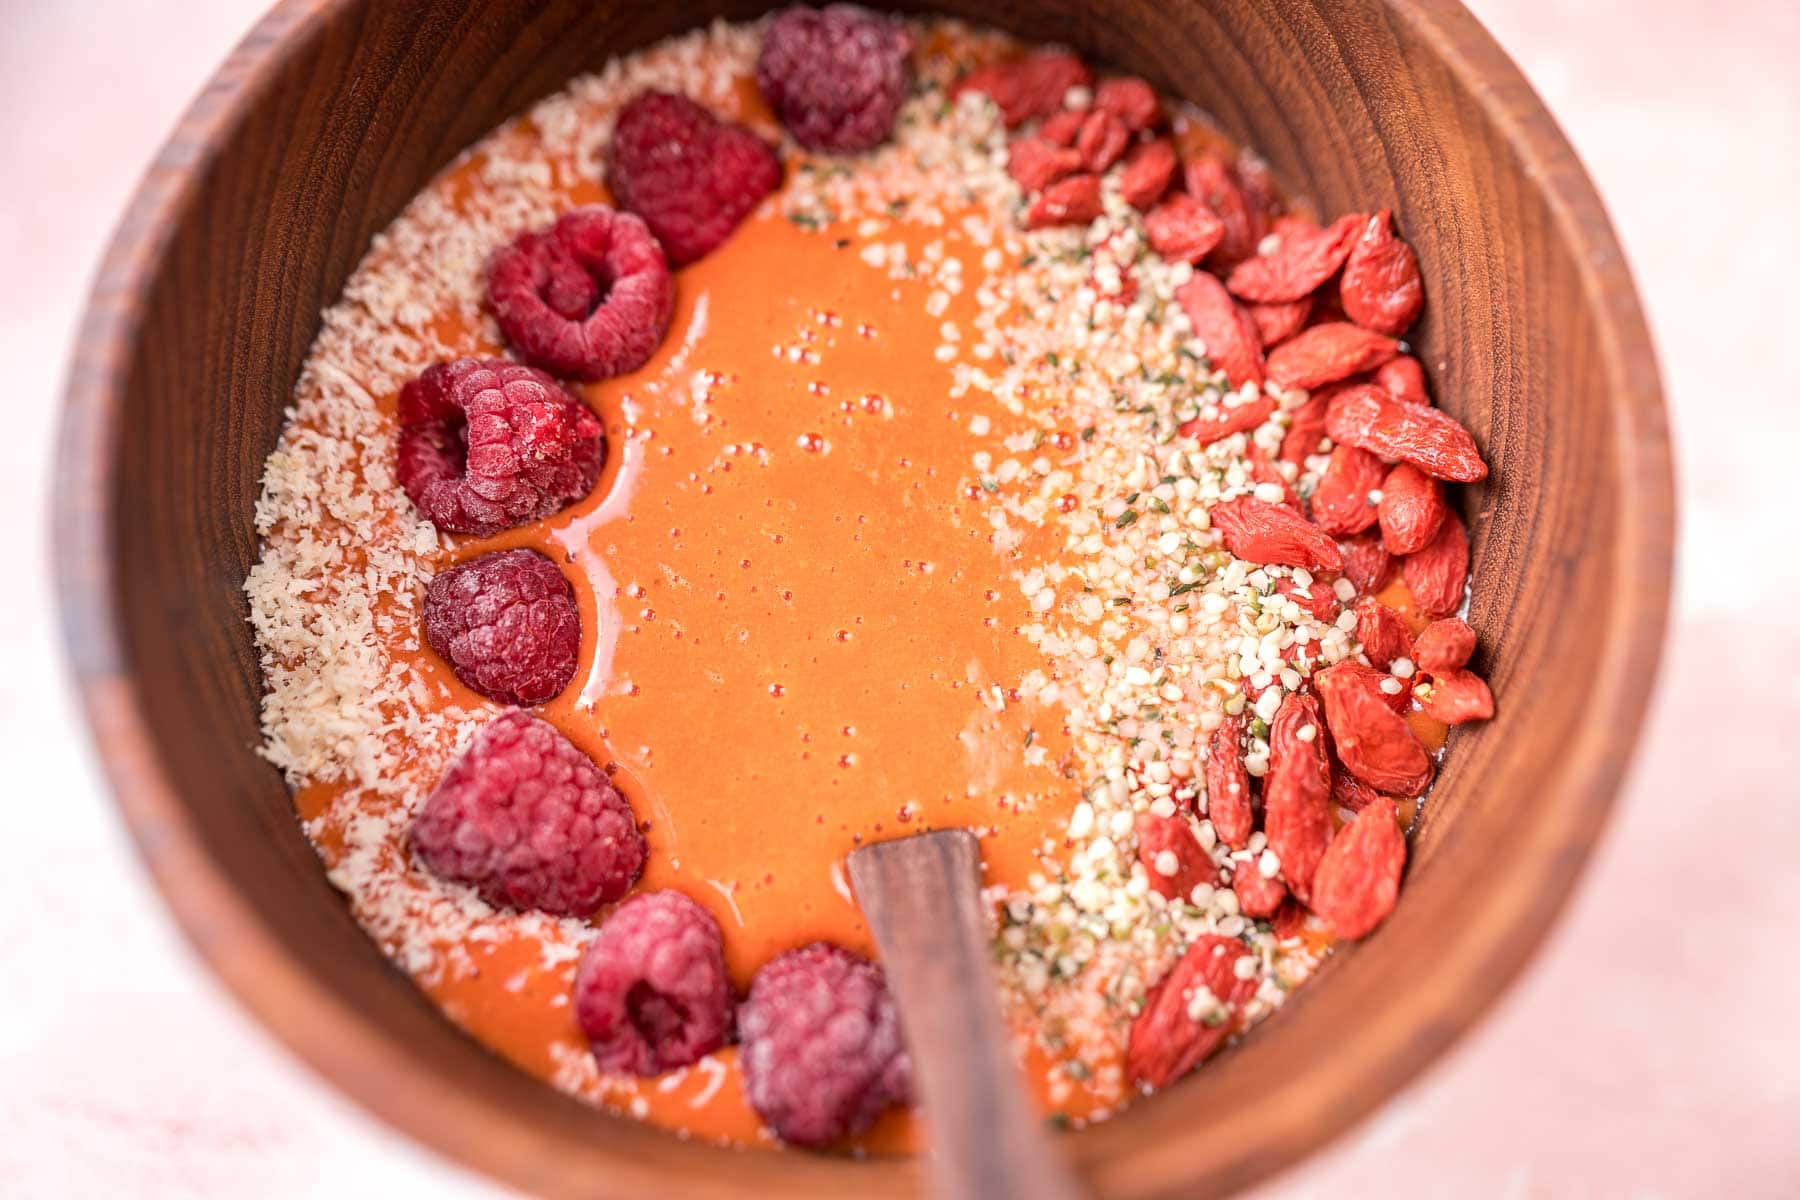 A close shot of a wooden bowl filled with a light red smoothie.